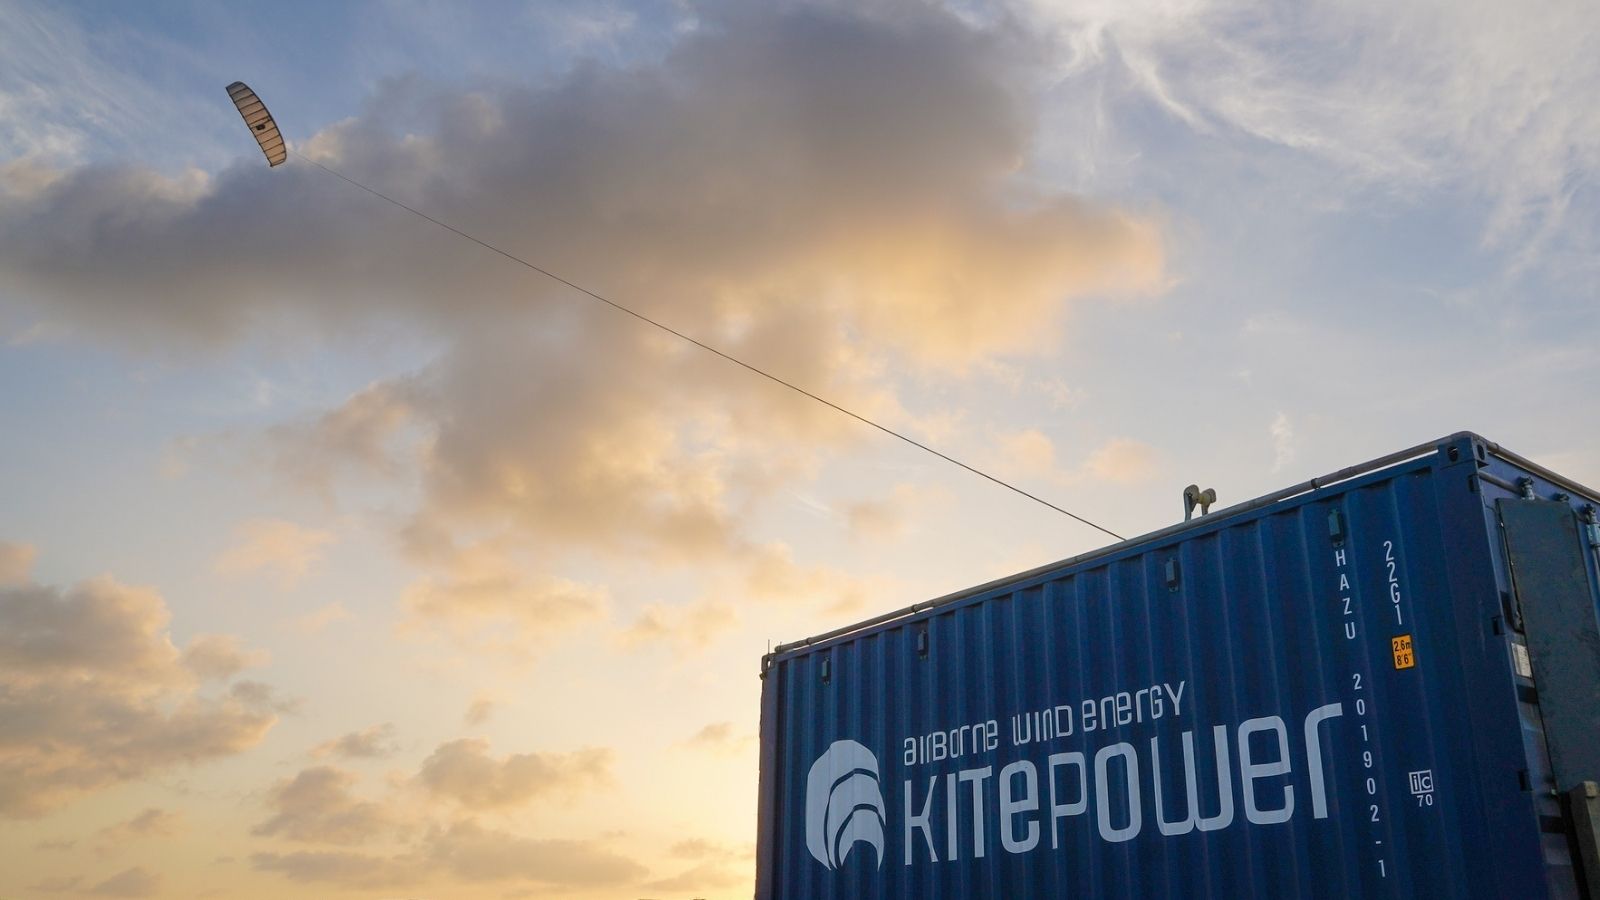 Container with the Kitepower logo linked to a kite in the air